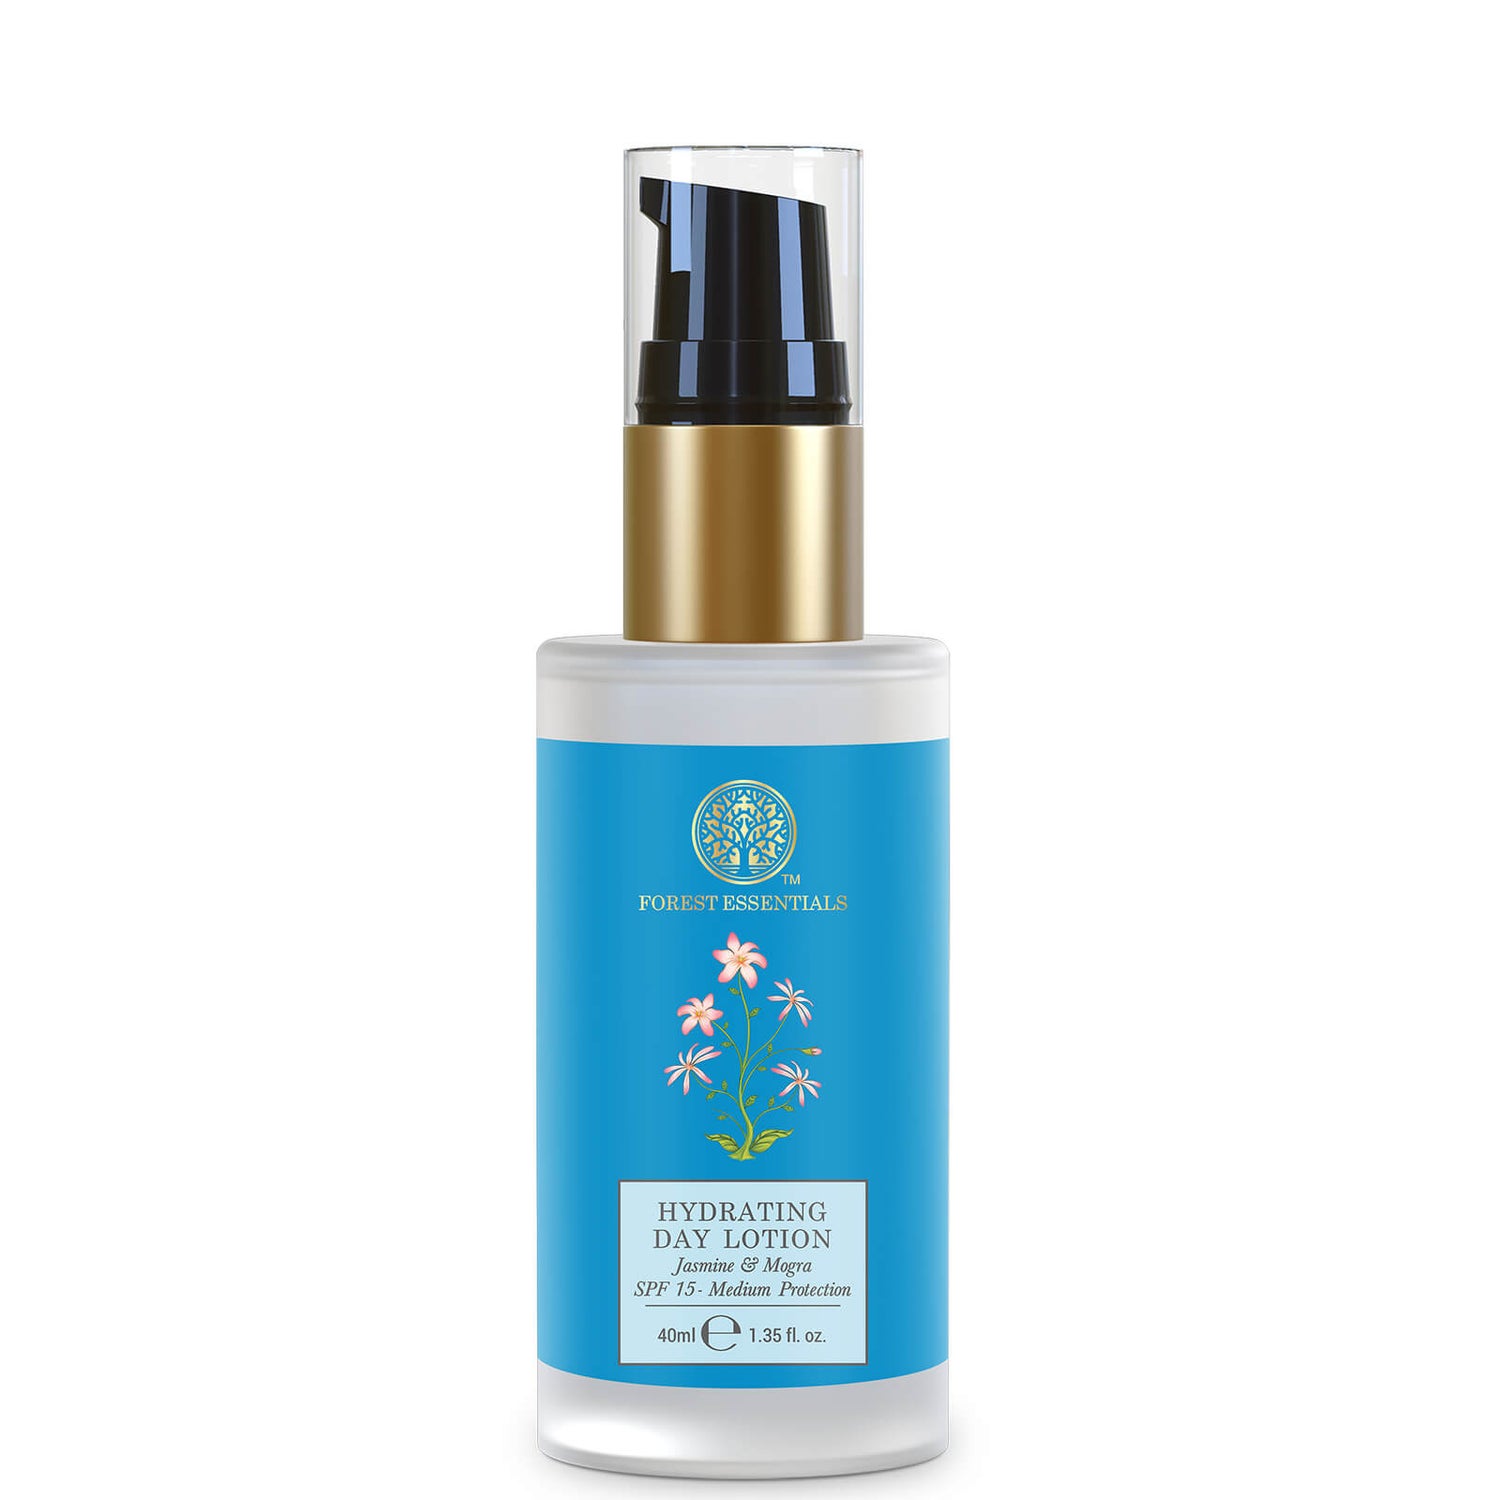 Forest Essentials Hydrating Day Lotion with SPF15 - Madurai Jasmine and Mogra 40ml